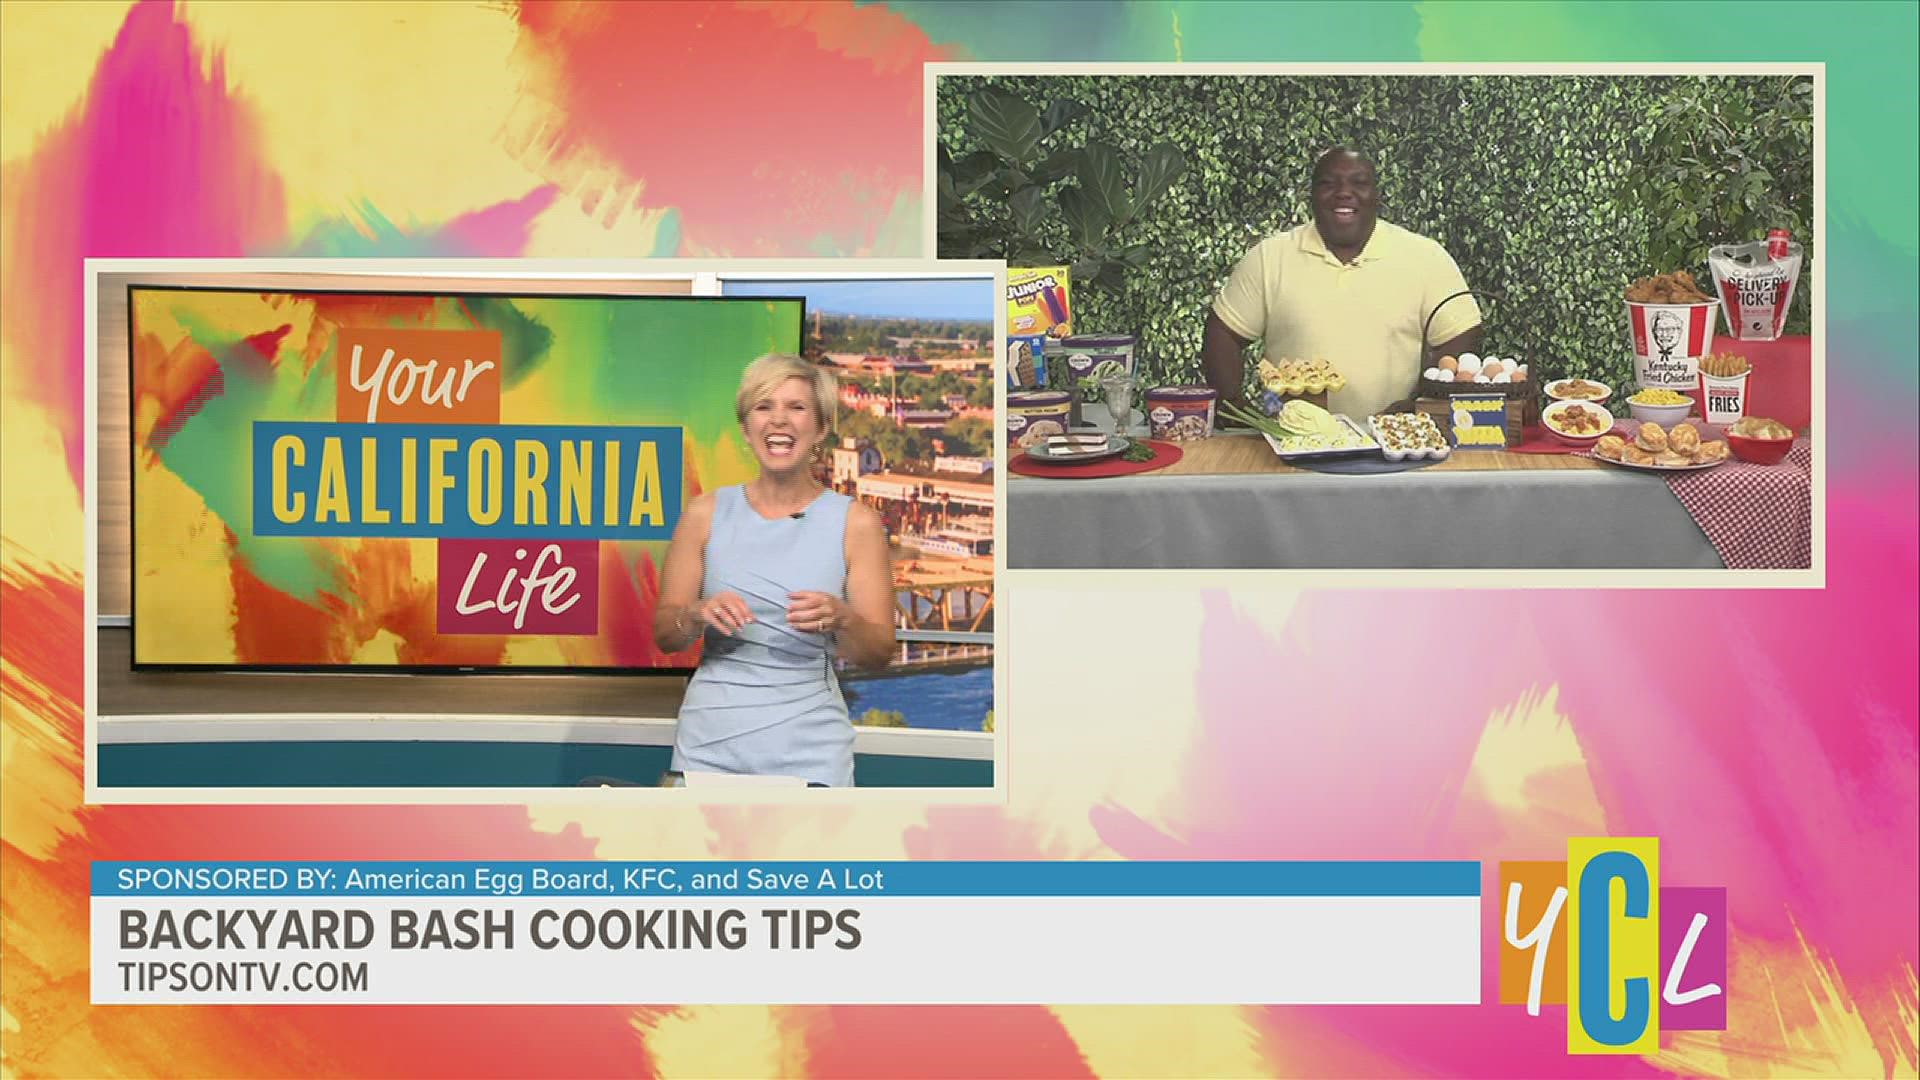 Celebrity Chef, Manny Washington, joins us with his recipe for a successful party! This segment is paid for by American Egg Board, KFC, and Save a Lot.